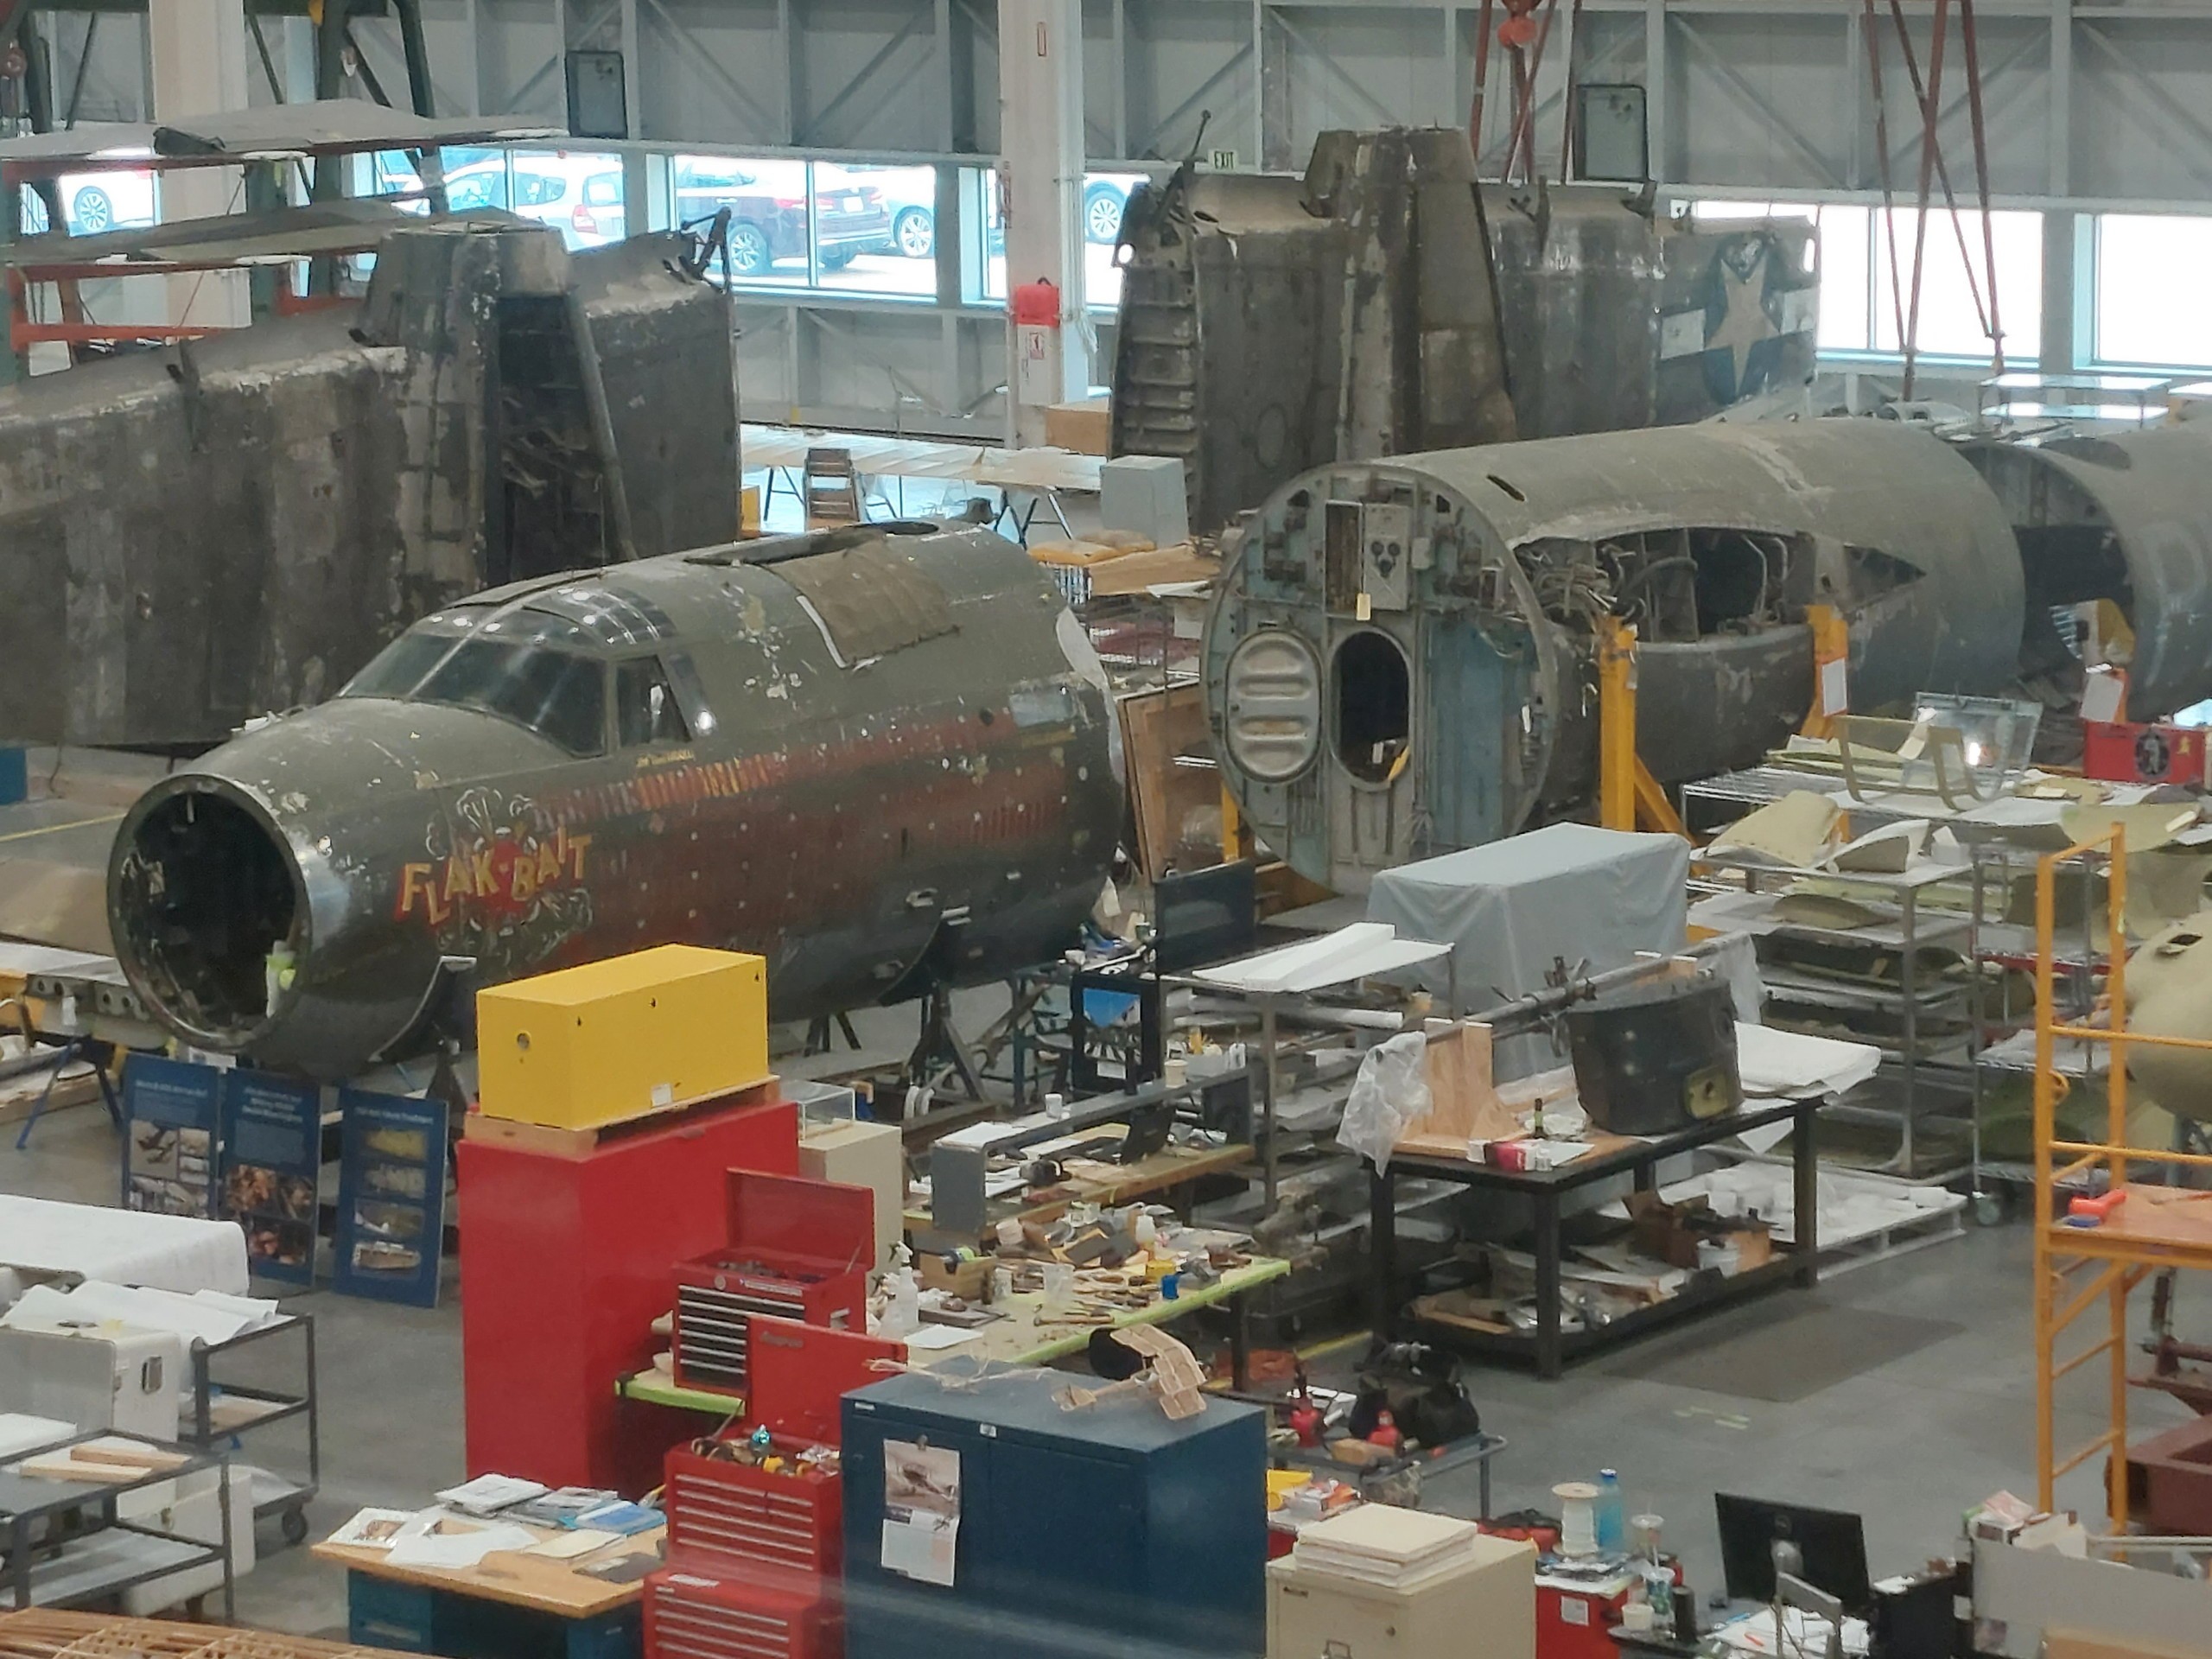 https://s1.cdn.autoevolution.com/images/news/gallery/this-hangar-takes-old-warplanes-and-restores-them-to-museum-condition-you-can-even-watch_5.jpg